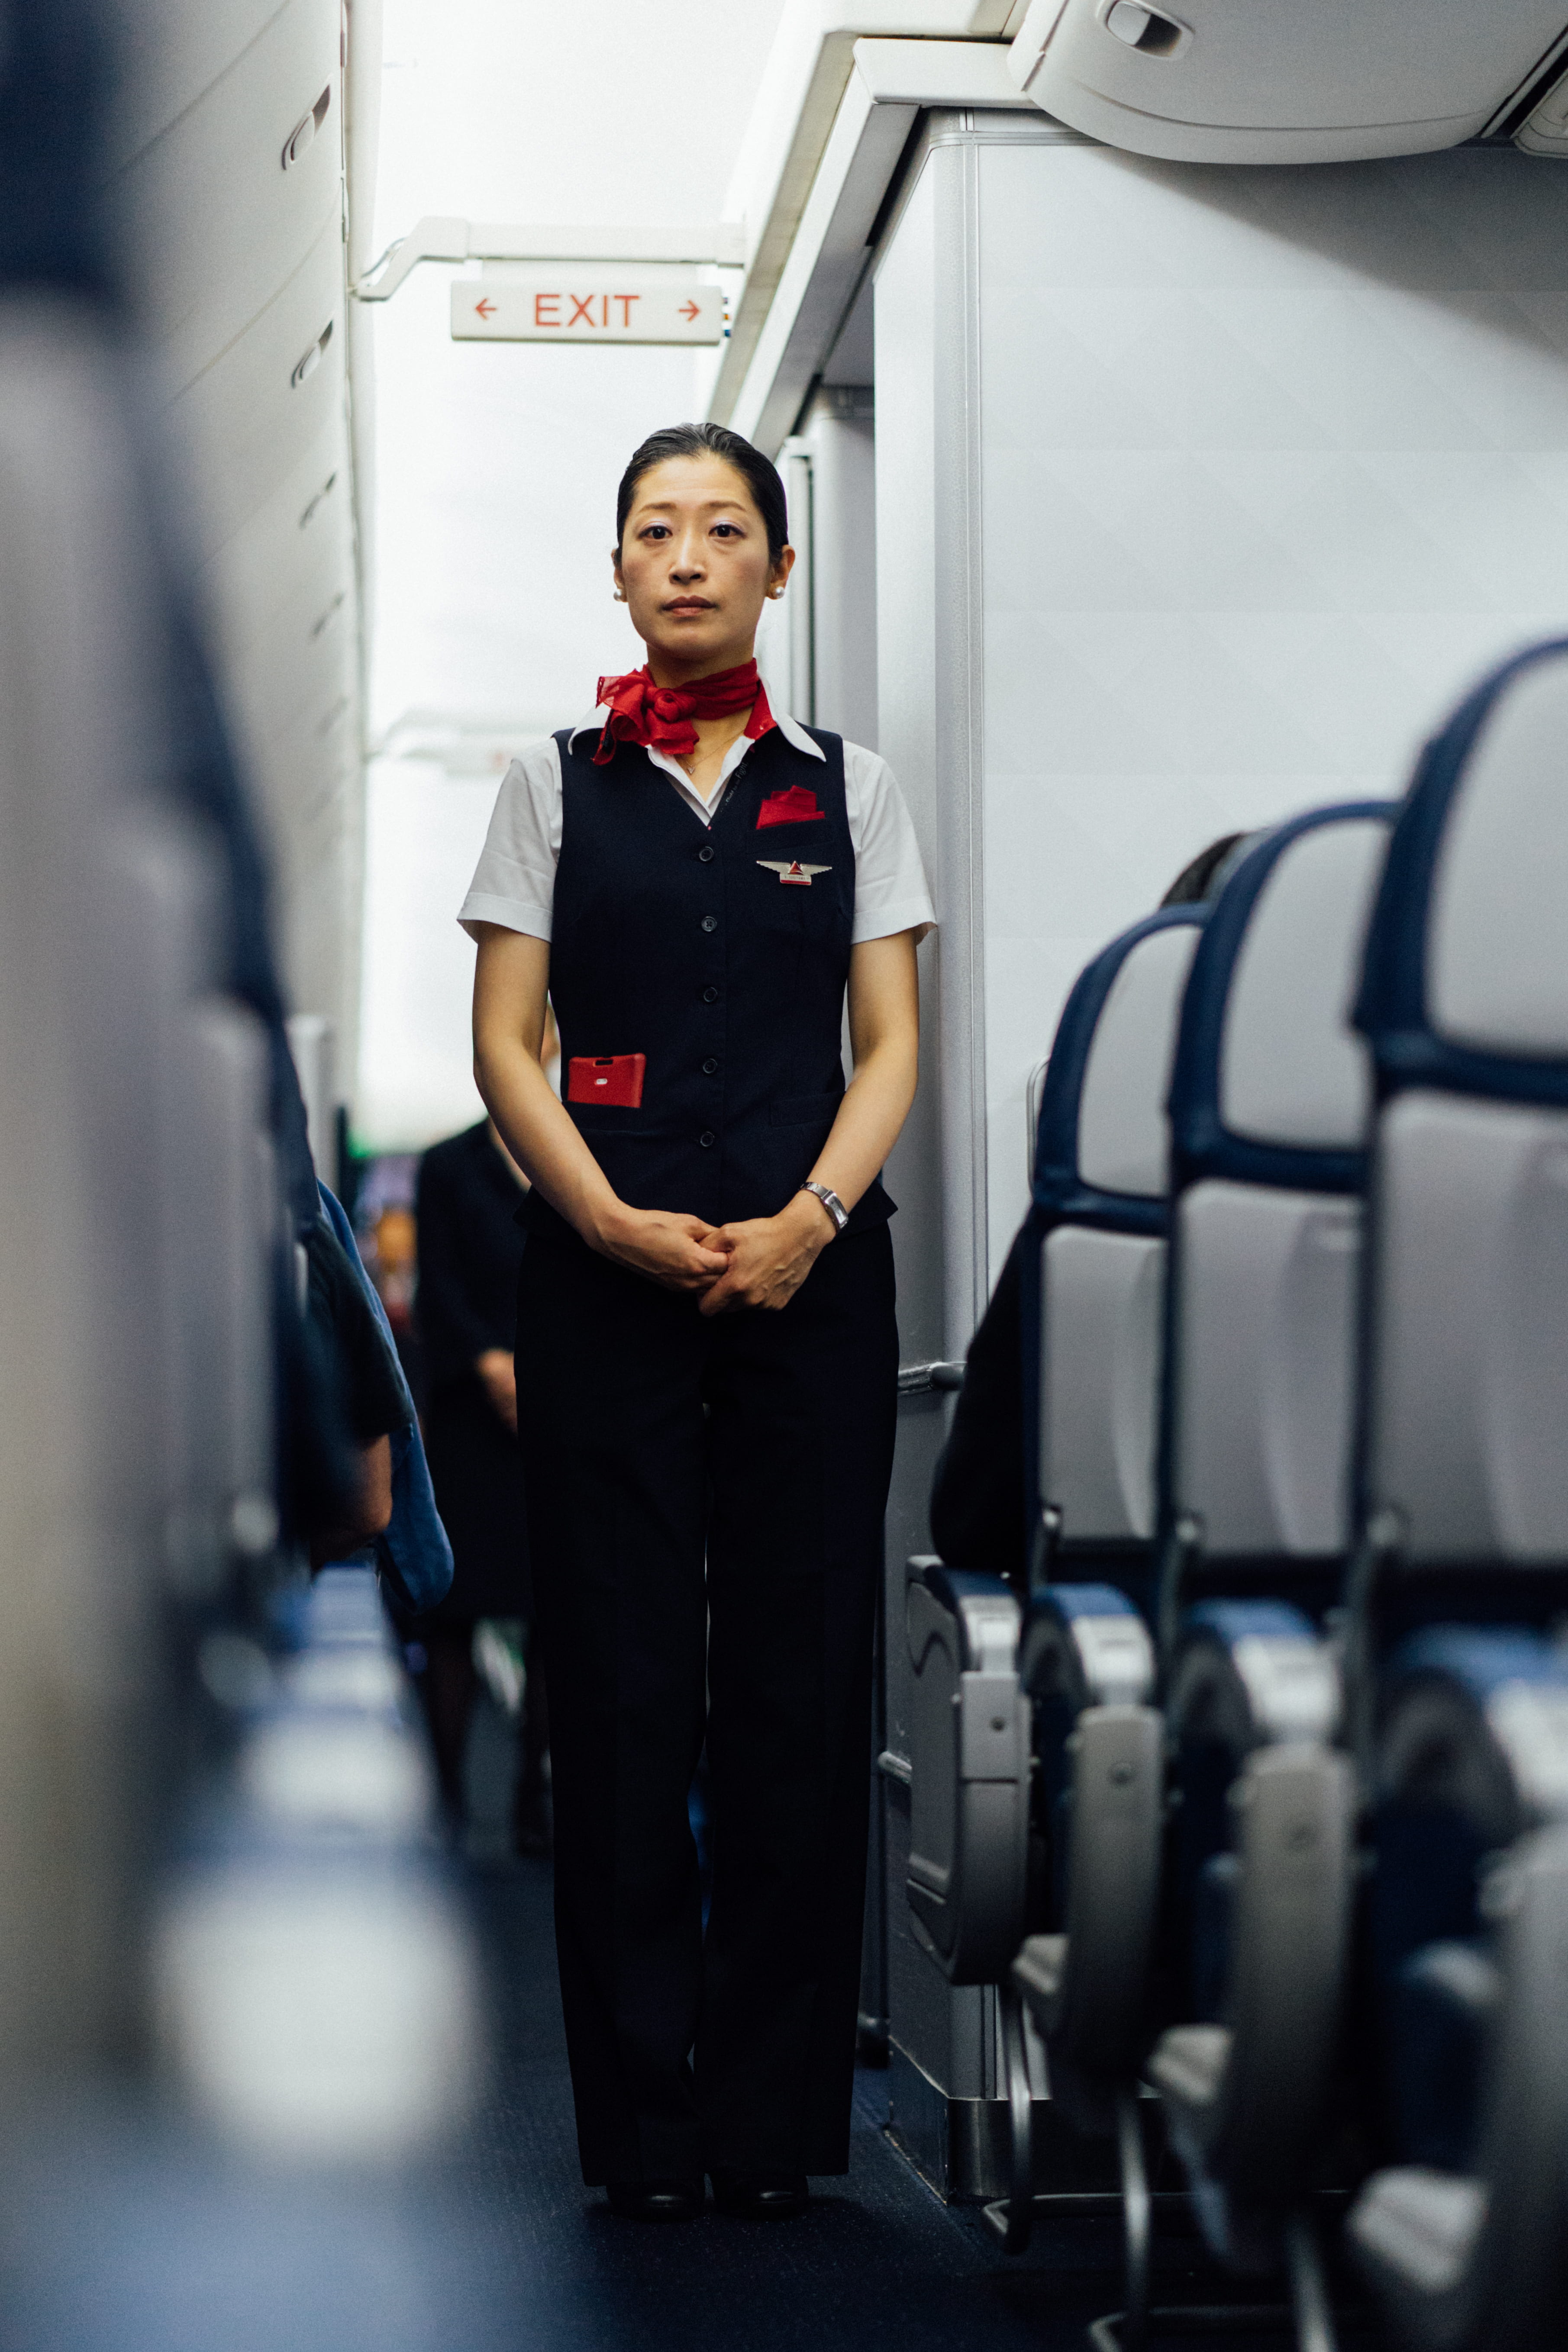 stewardess standing near exit inside plane, woman in black top and pants standing near exit